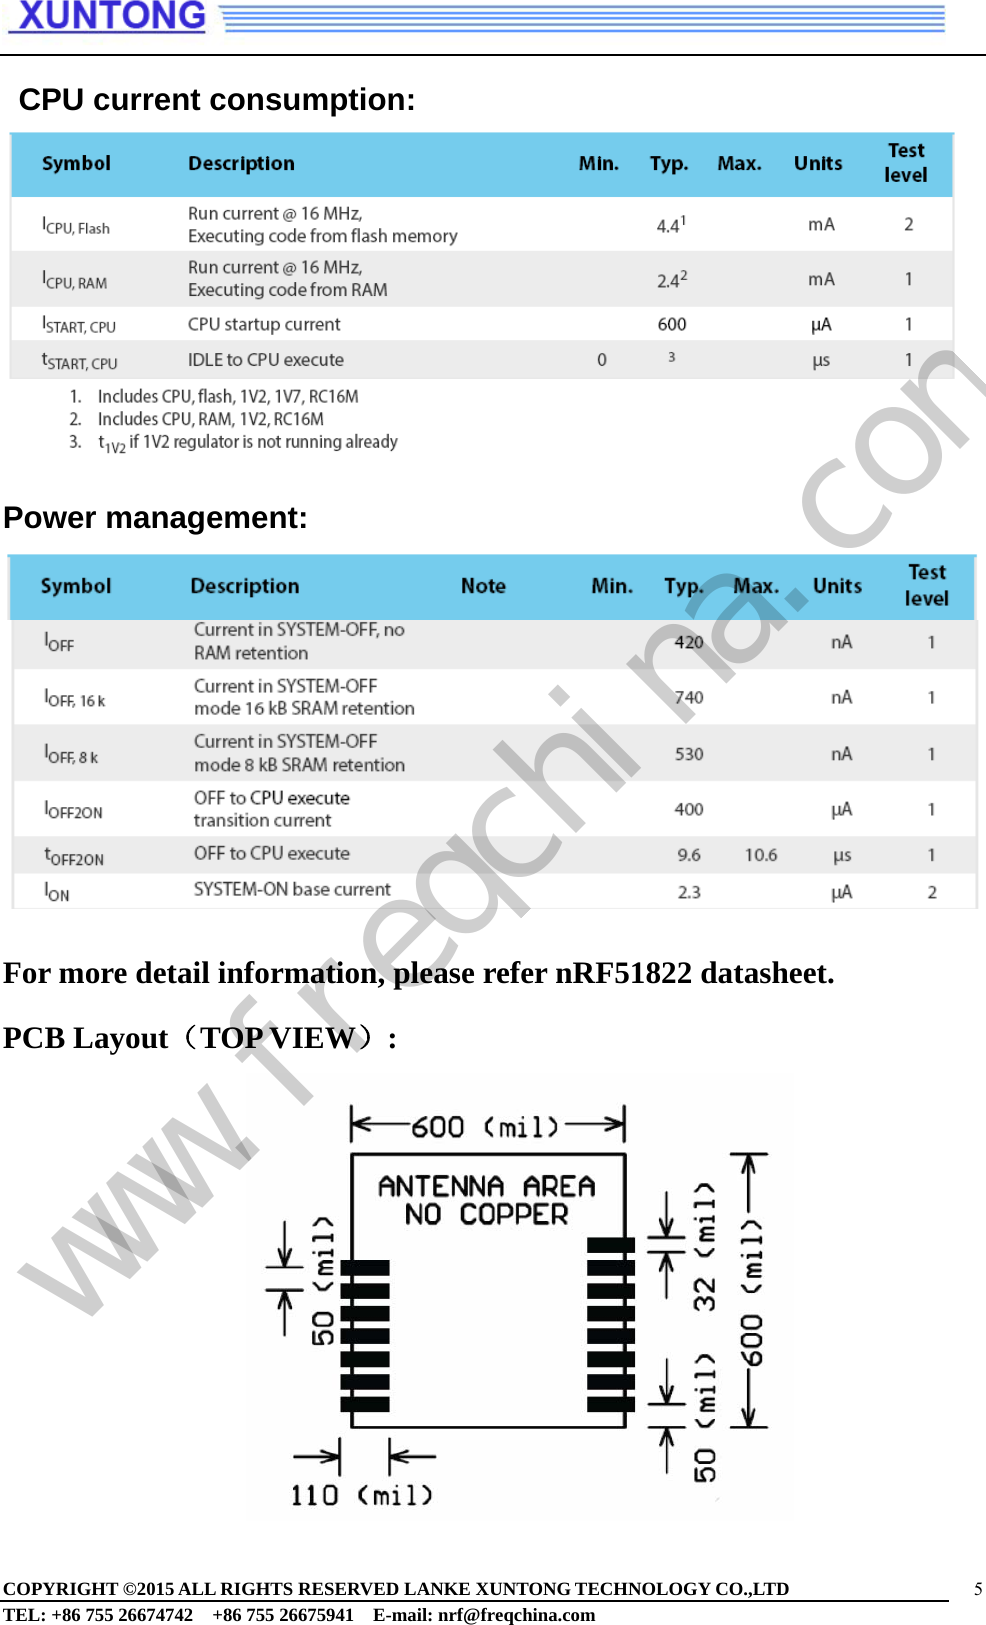  COPYRIGHT ©2015 ALL RIGHTS RESERVED LANKE XUNTONG TECHNOLOGY CO.,LTD     TEL: +86 755 26674742    +86 755 26675941    E-mail: nrf@freqchina.com 5  CPU current consumption:  Power management:       For more detail information, please refer nRF51822 datasheet. PCB Layout（TOP VIEW）:   www.freqchina.com